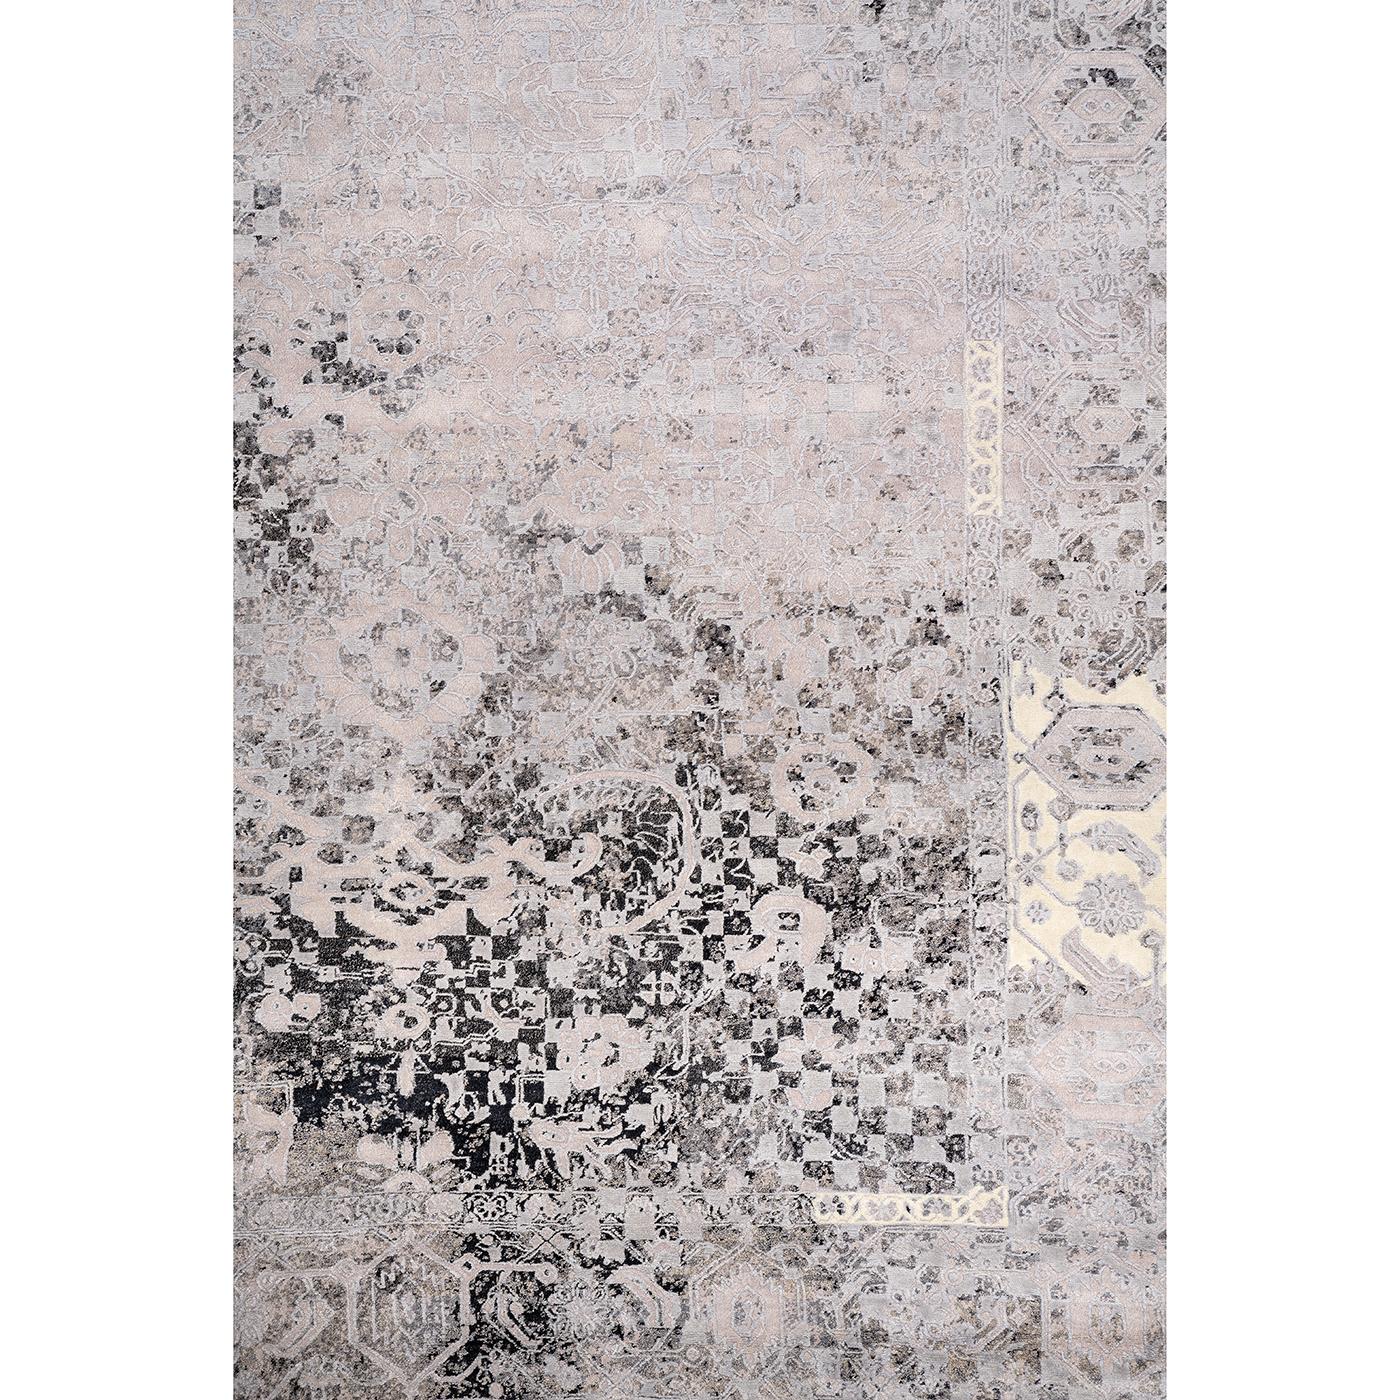 This exquisite rug will infuse a calm and quiet feeling into any space with its abstract design in predominantly light gray color with gentile shimmers of champagne color. Perfectly matching most interior palettes, this exquisite piece fashioned